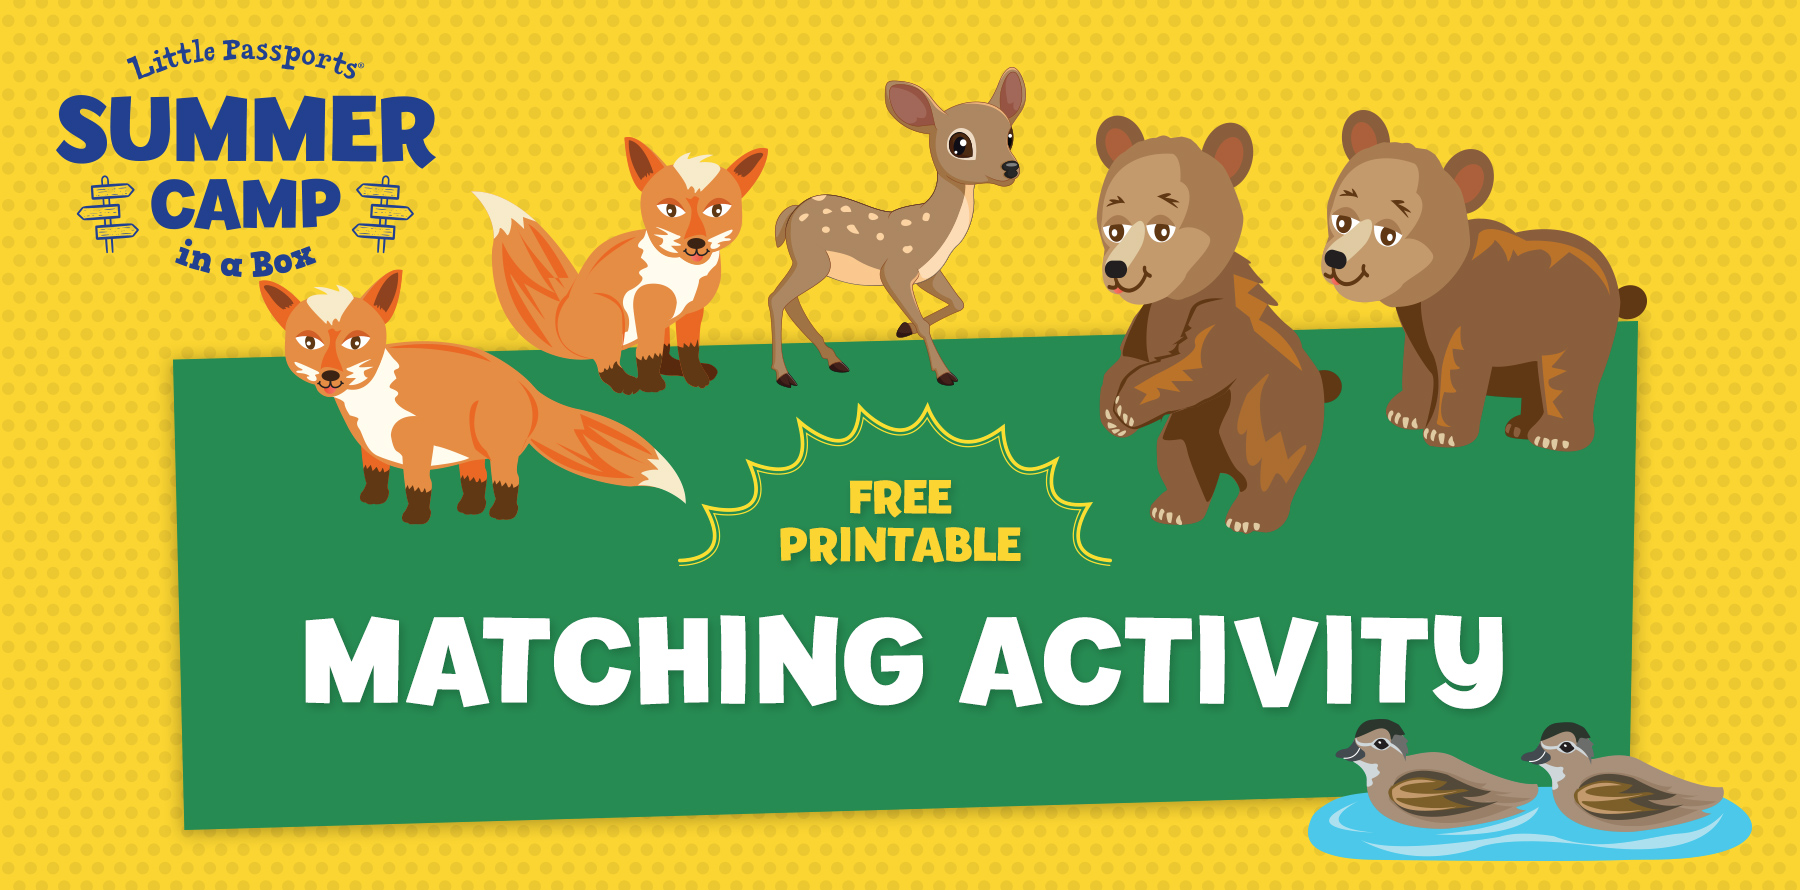 Matching game Kids - cute Animals animated GIFs - Online, Free